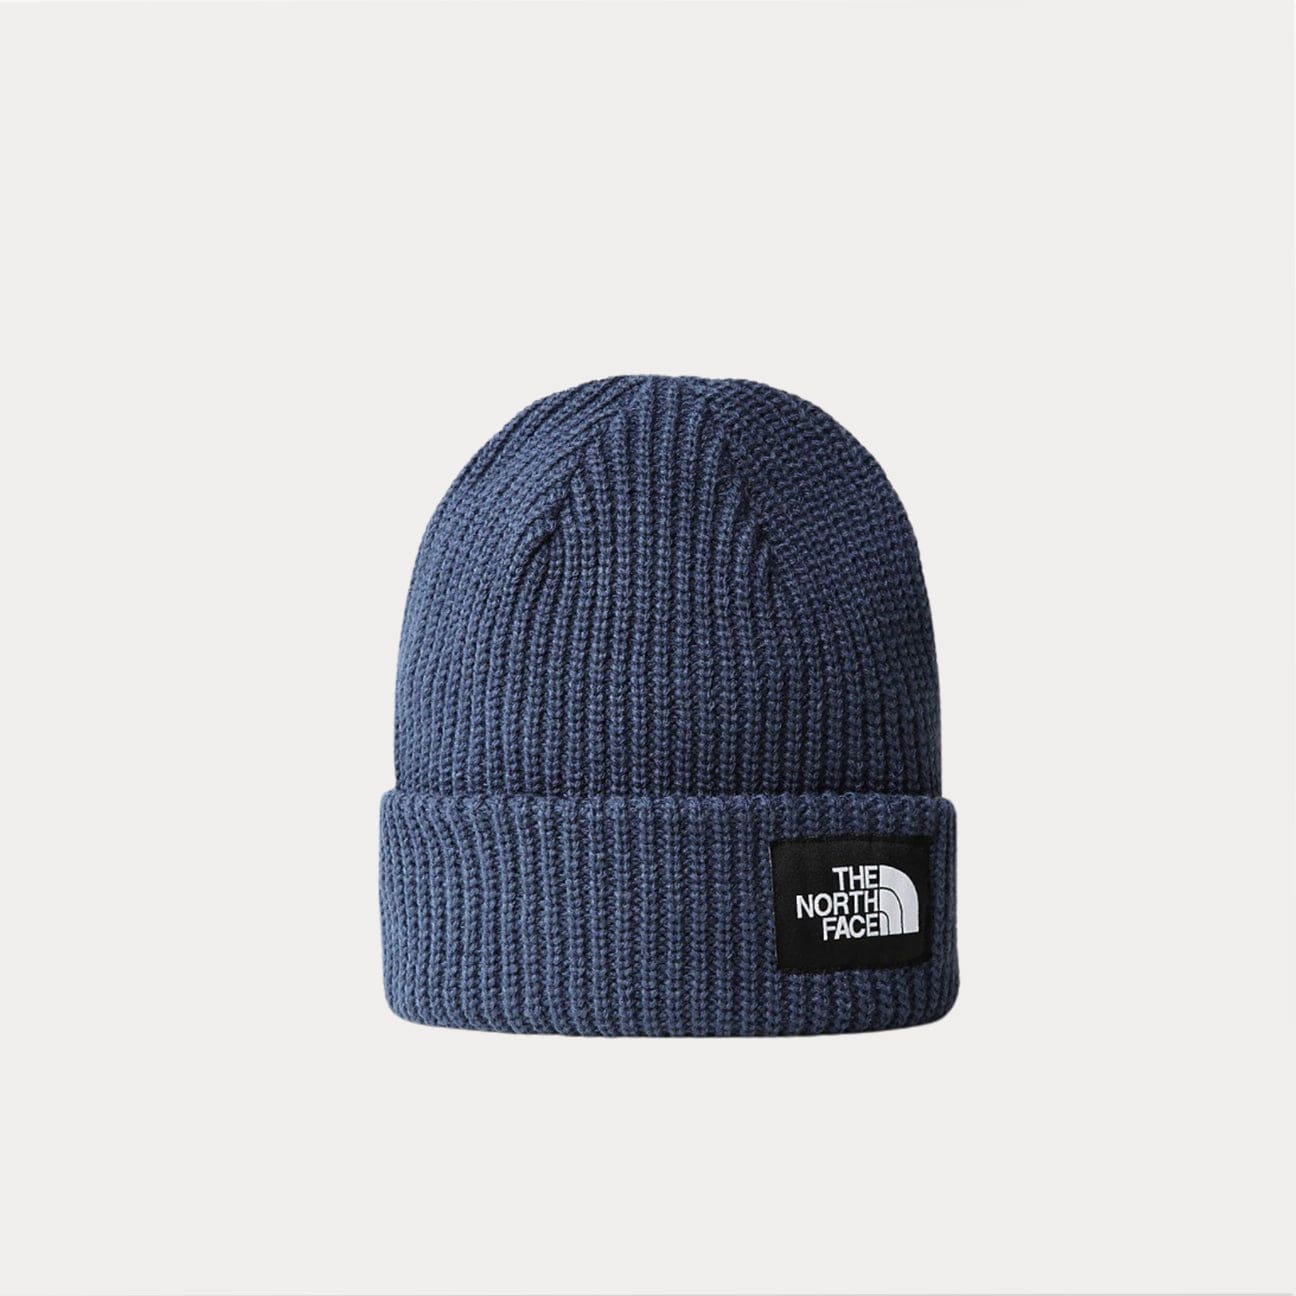 THE NORTH FACE Cappello Beanie Salty Dog Shady Blue